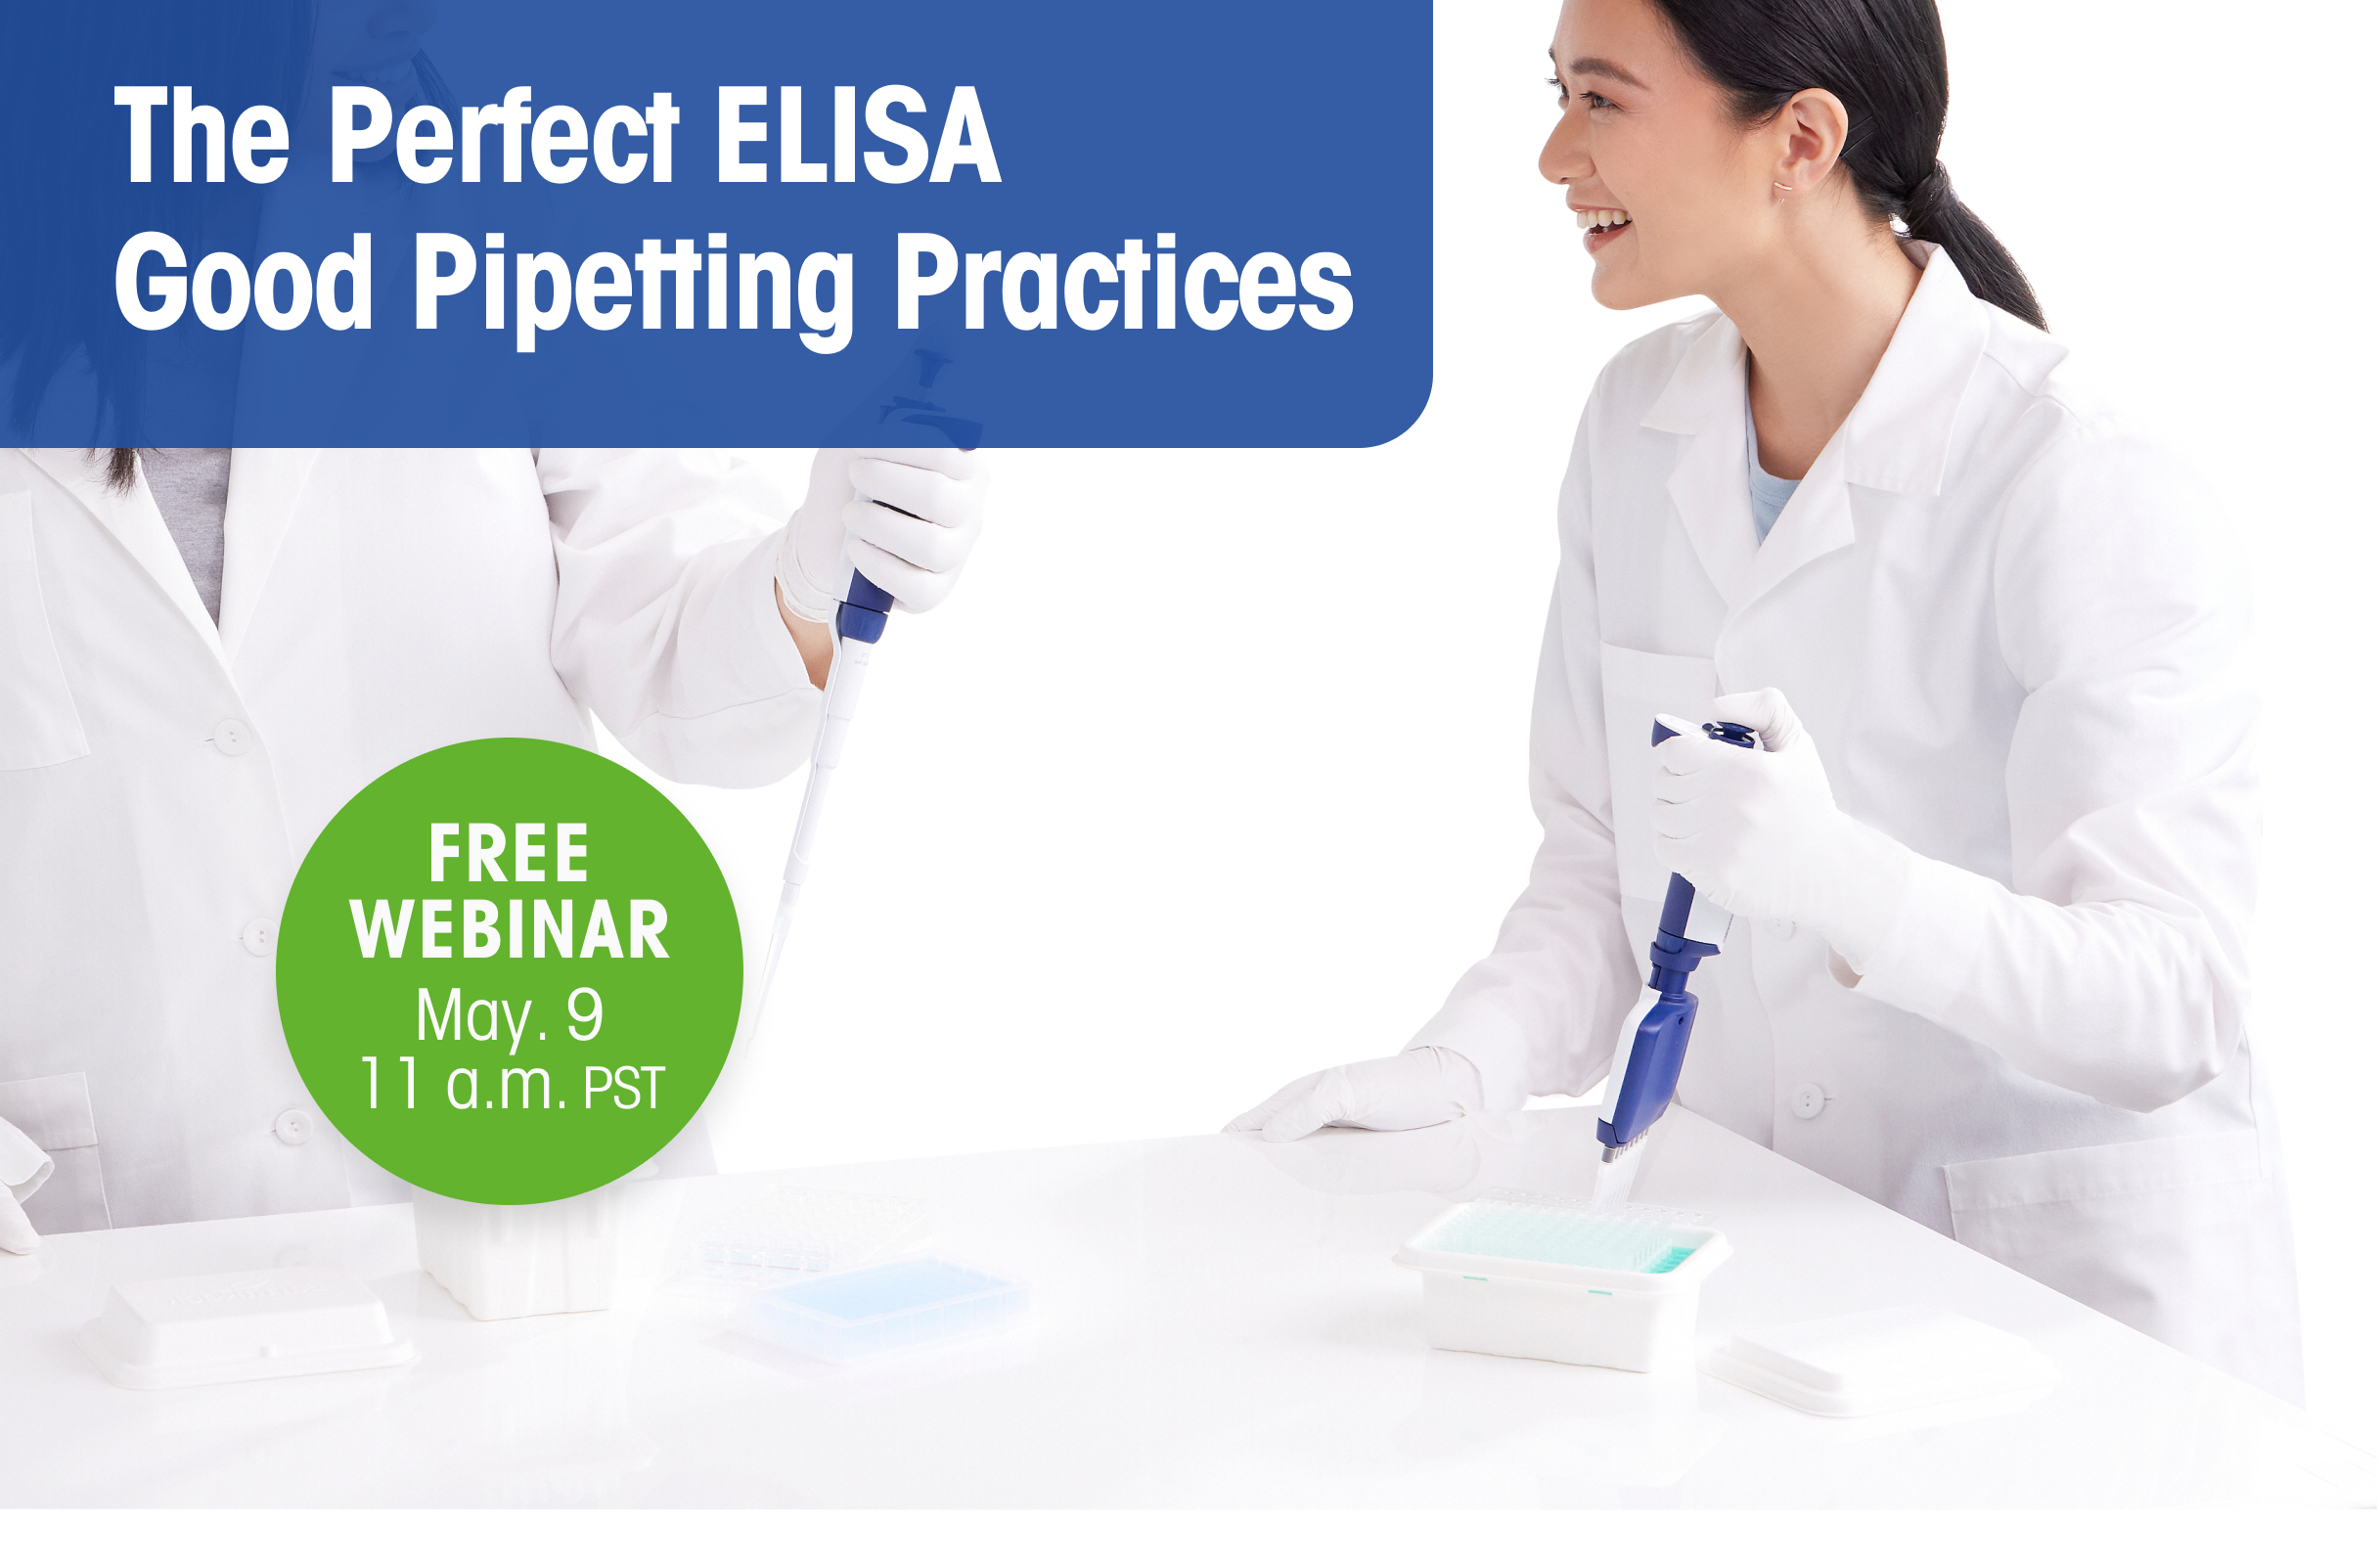 Learn How to Perform the Perfect ELISA!